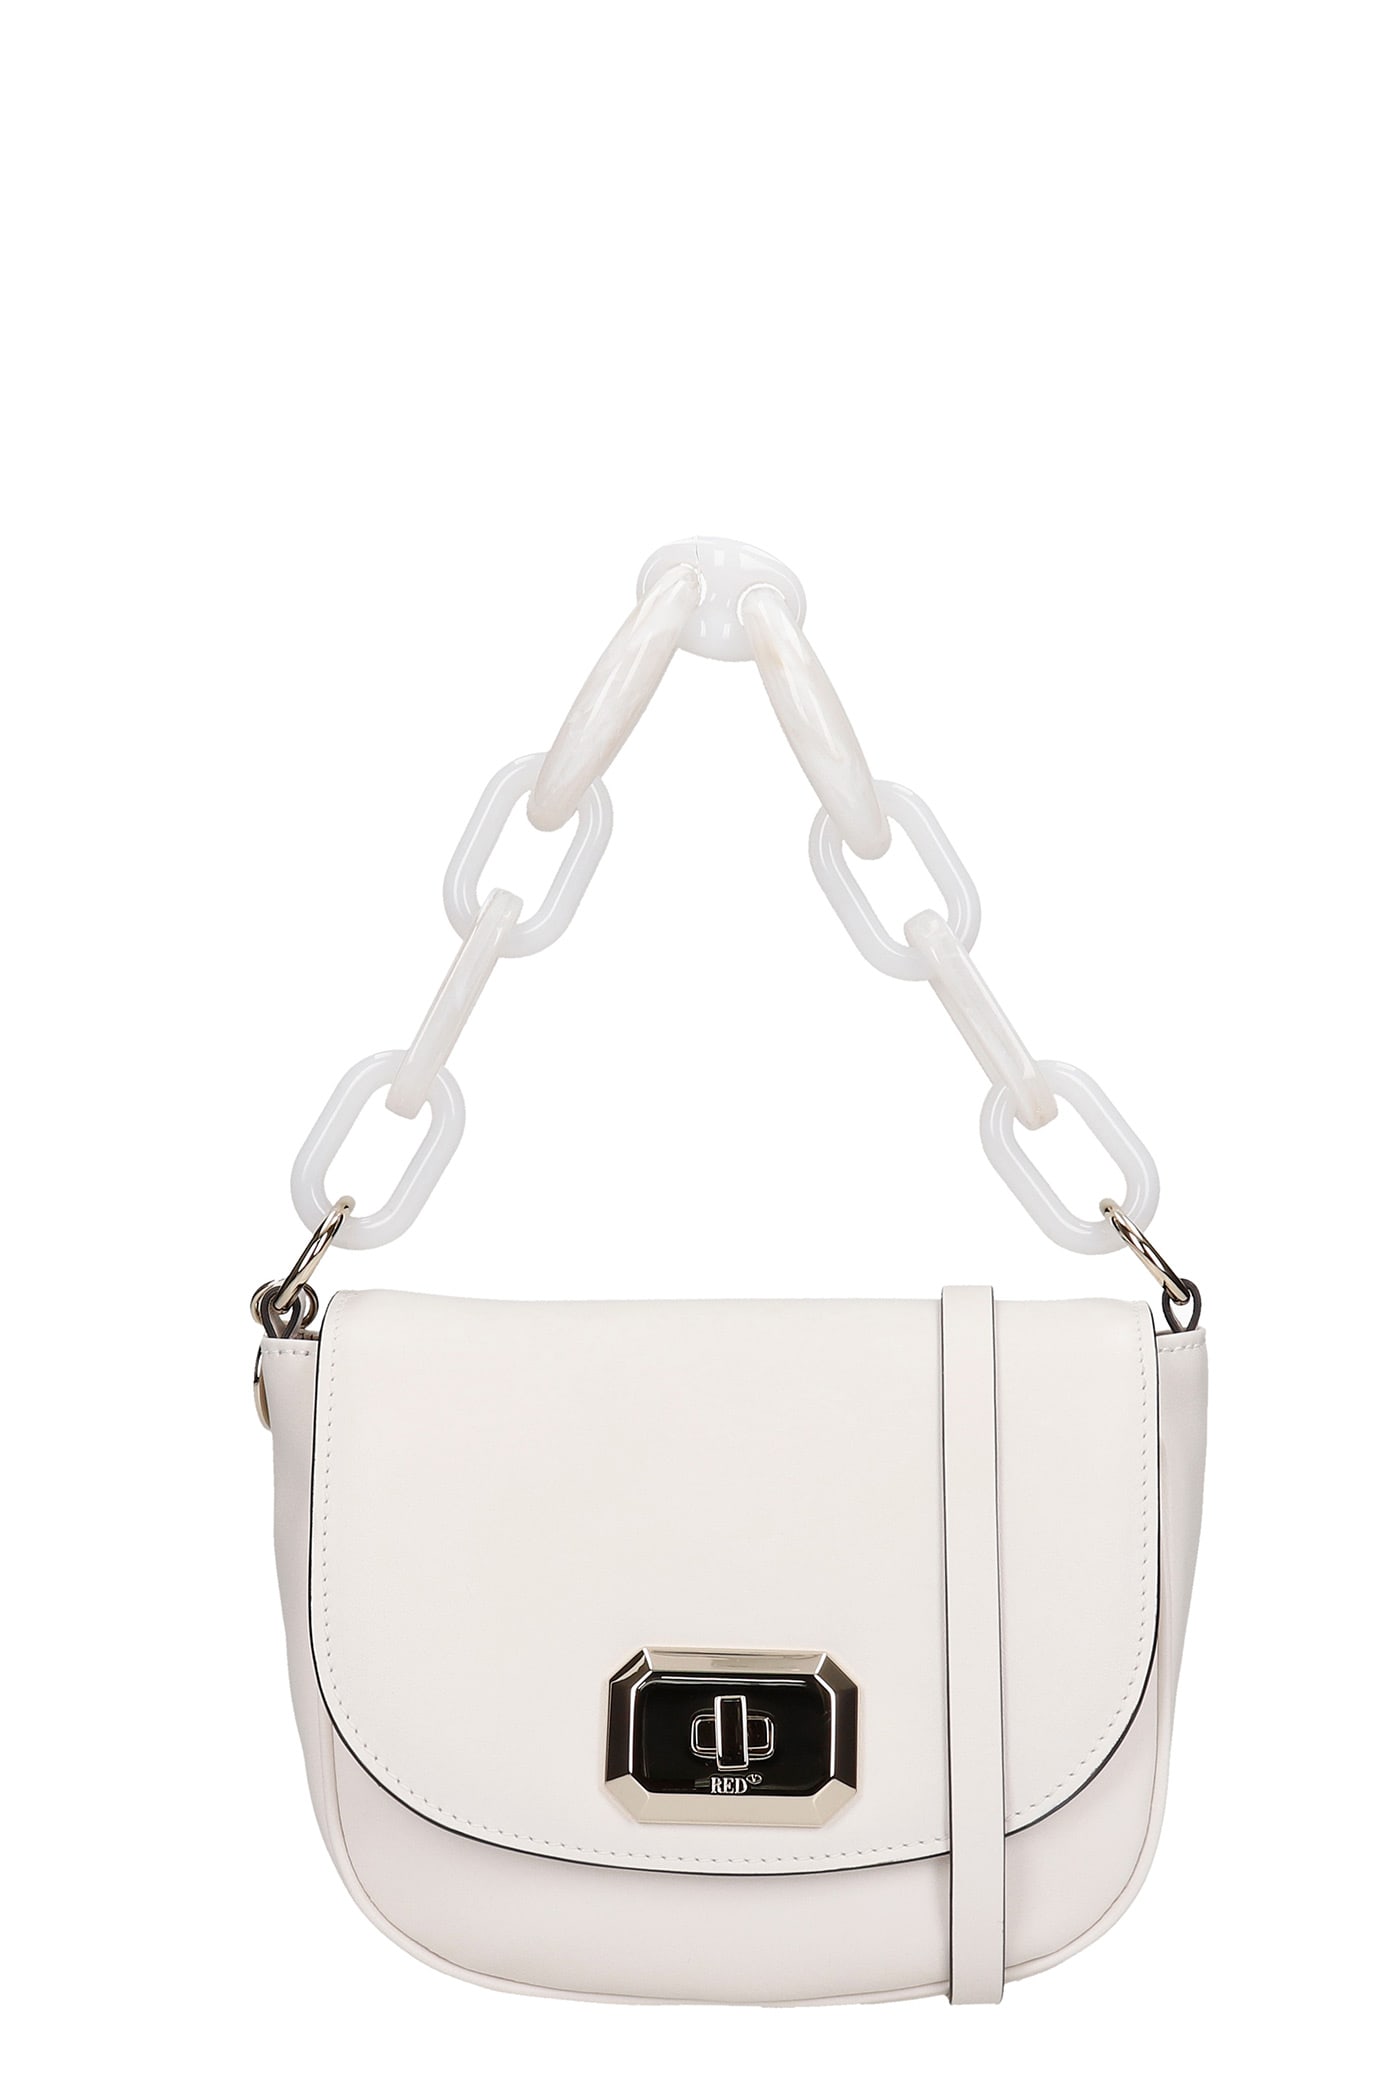 RED VALENTINO SHOULDER BAG IN WHITE LEATHER,11837003